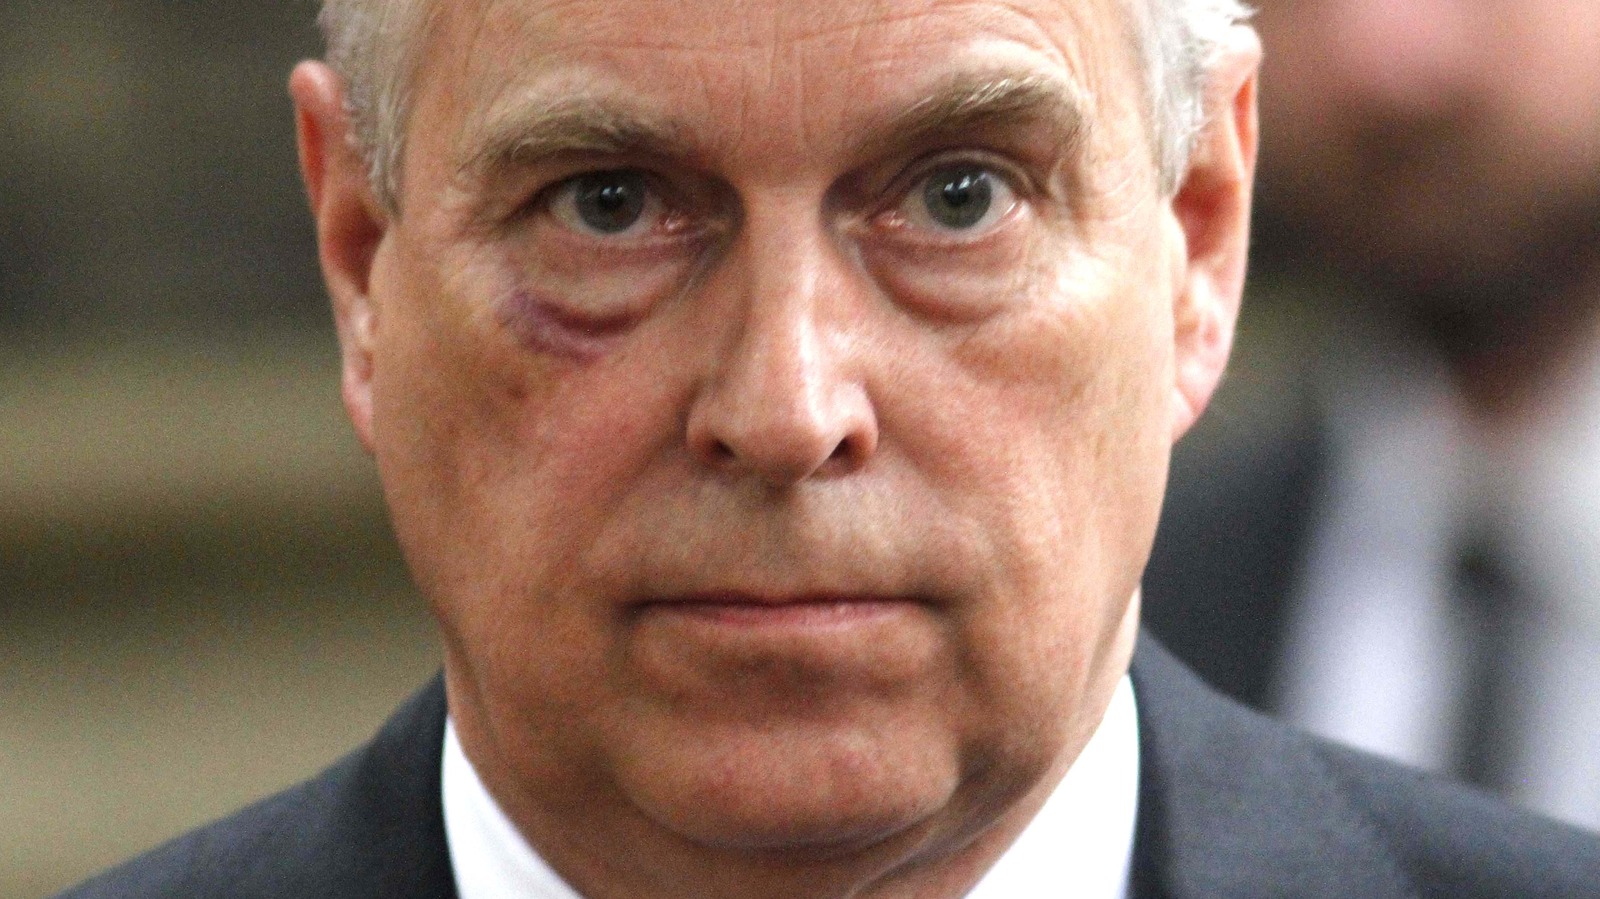 The Prince Andrew Sexual Assault Case Is Taking Another Strange Turn 6125